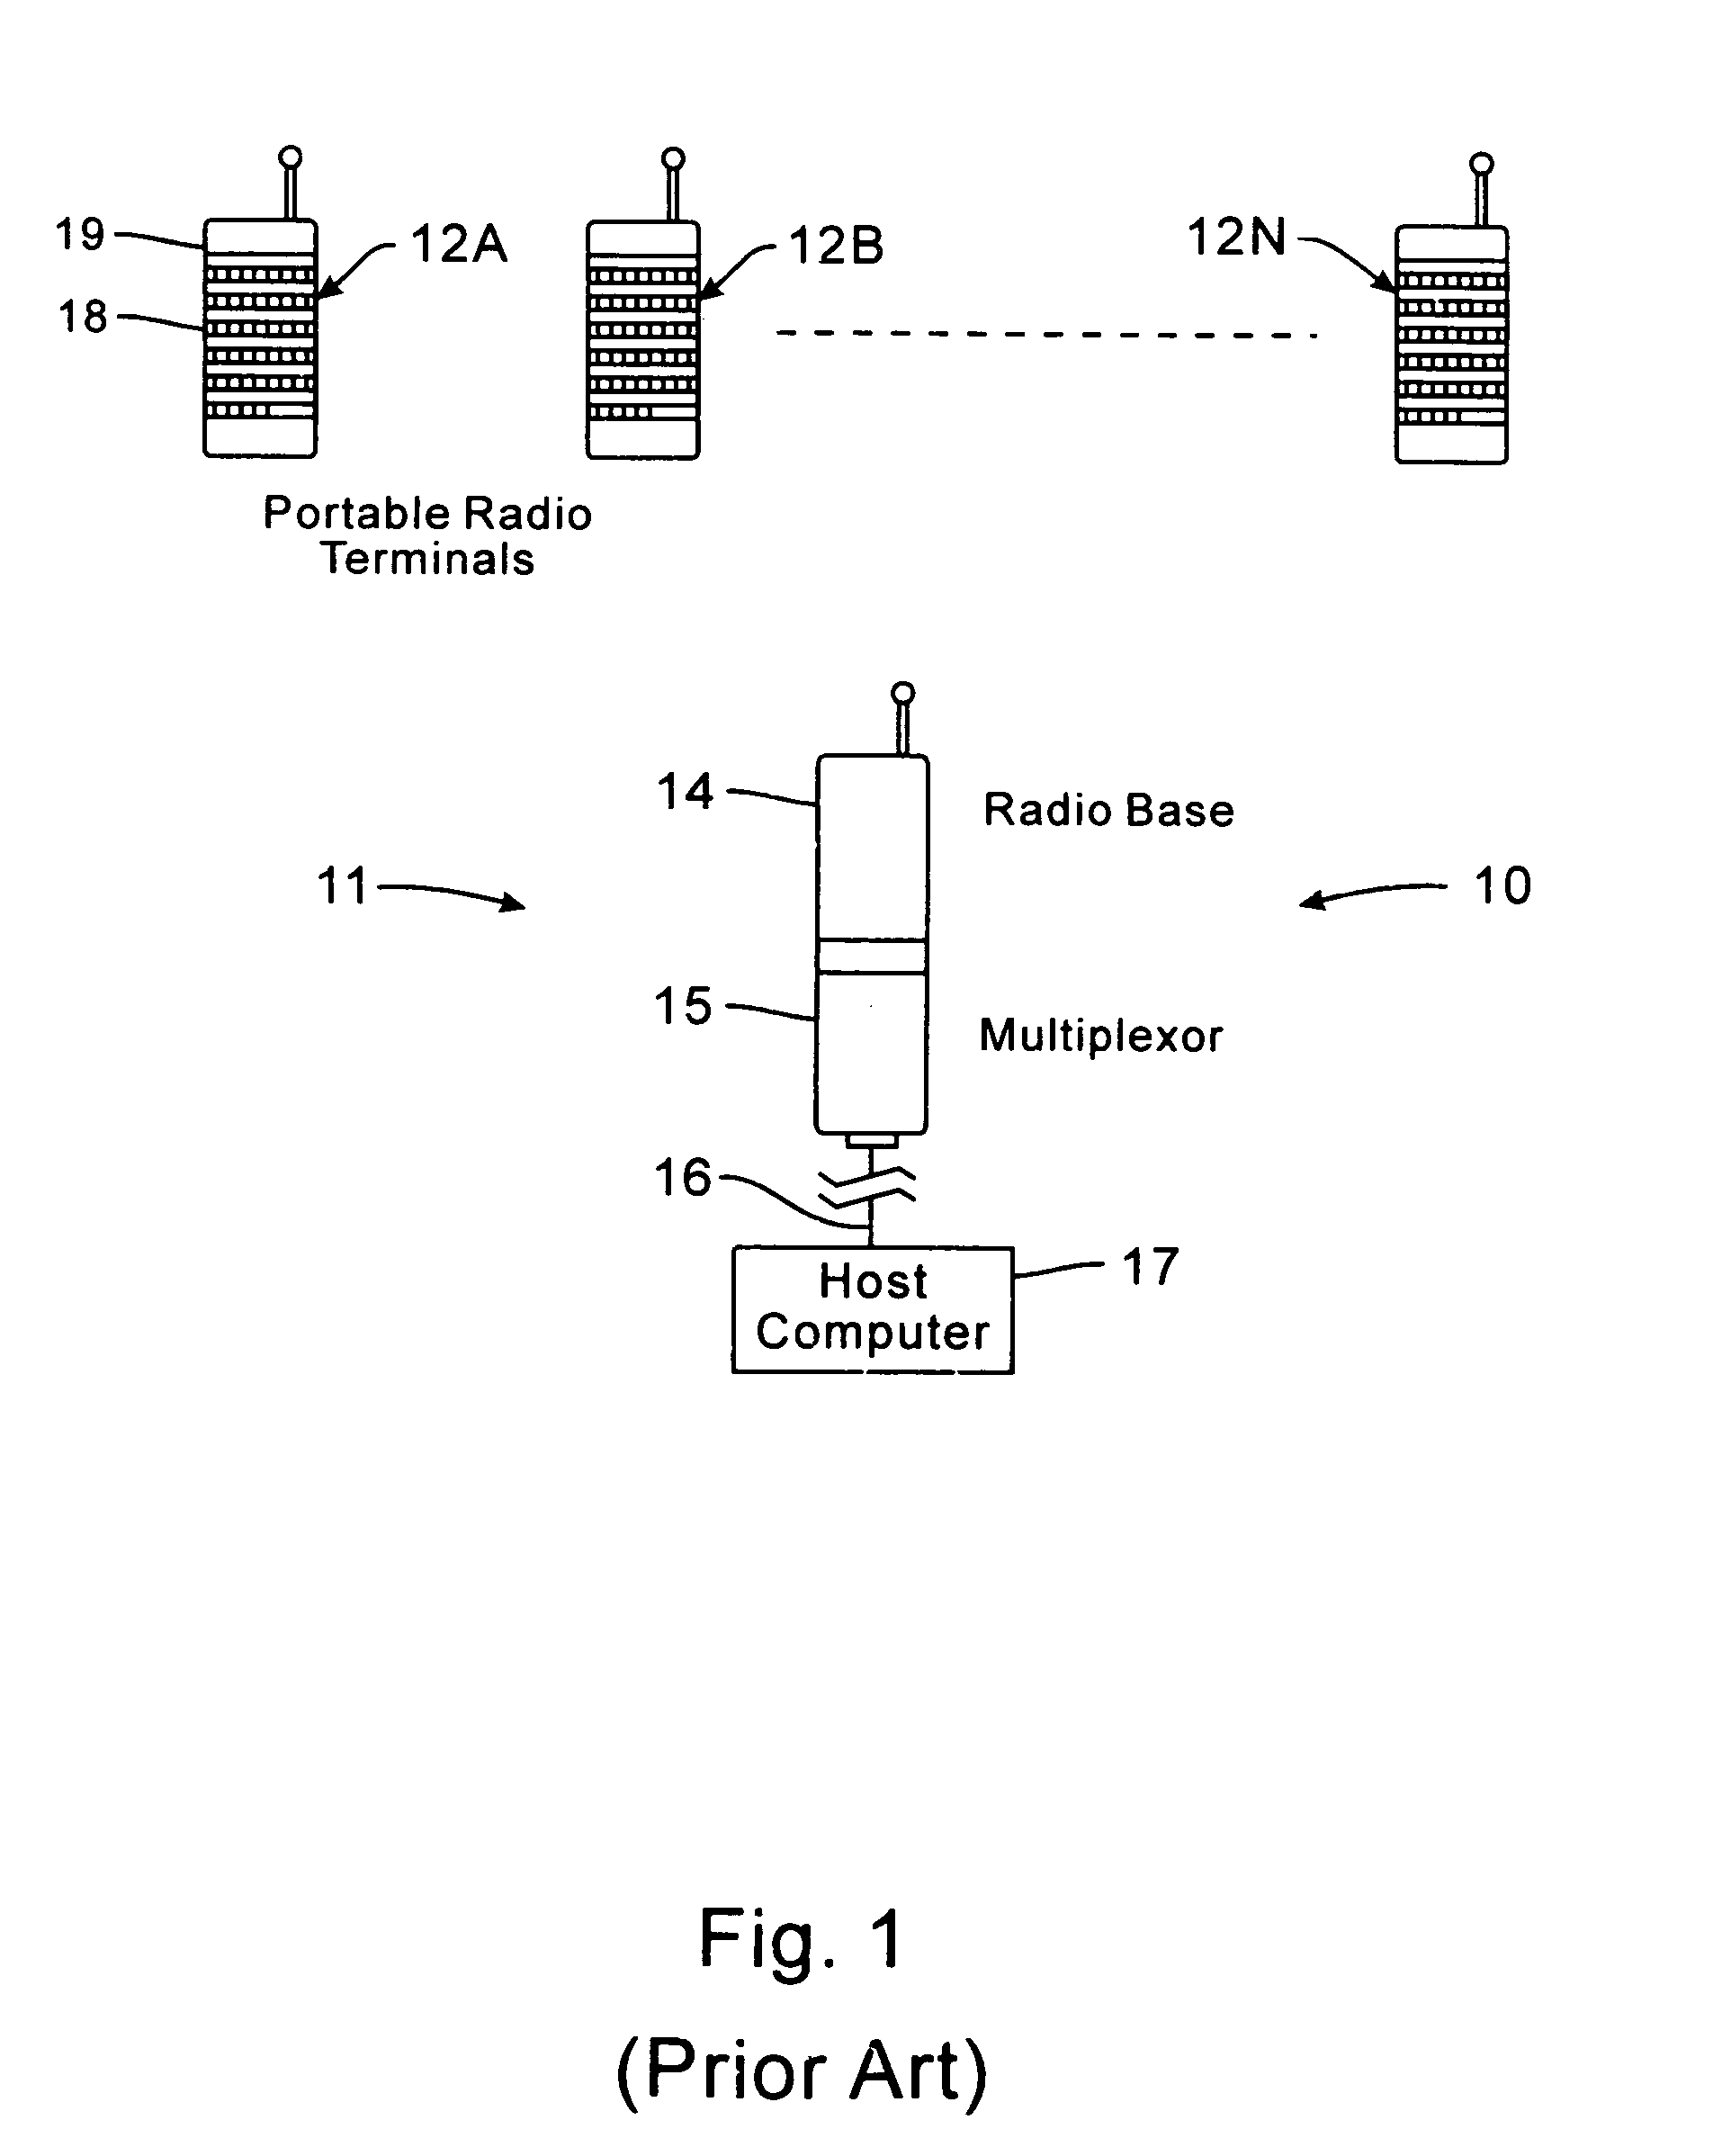 Low-power messaging in a network supporting roaming terminals